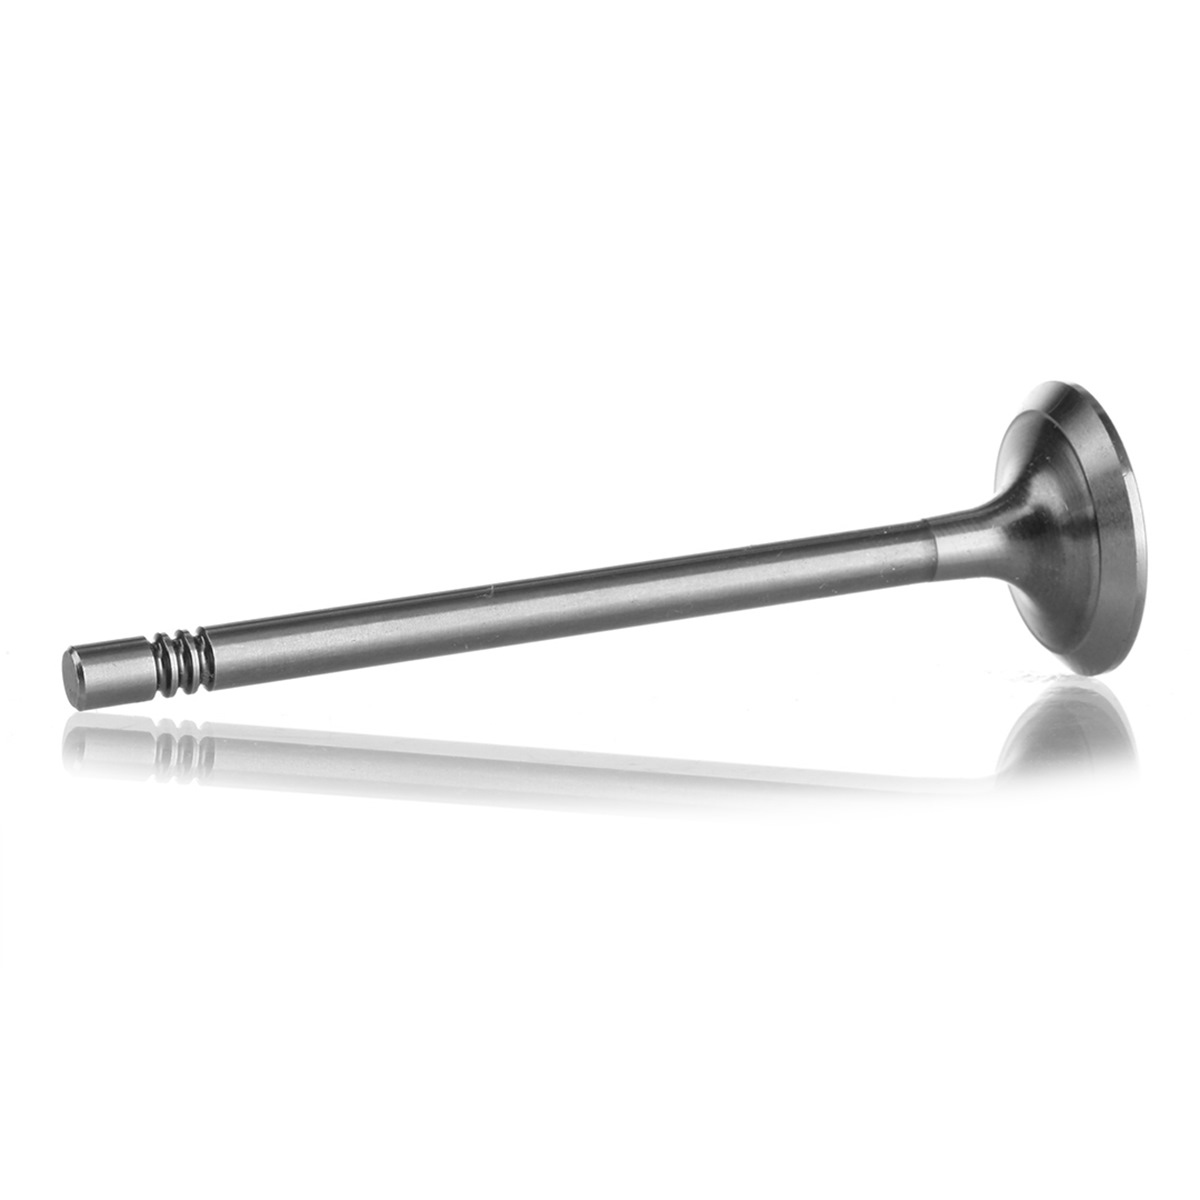 PVWG036-A-0-N AMP Engine exhaust valve BMW 28 mm